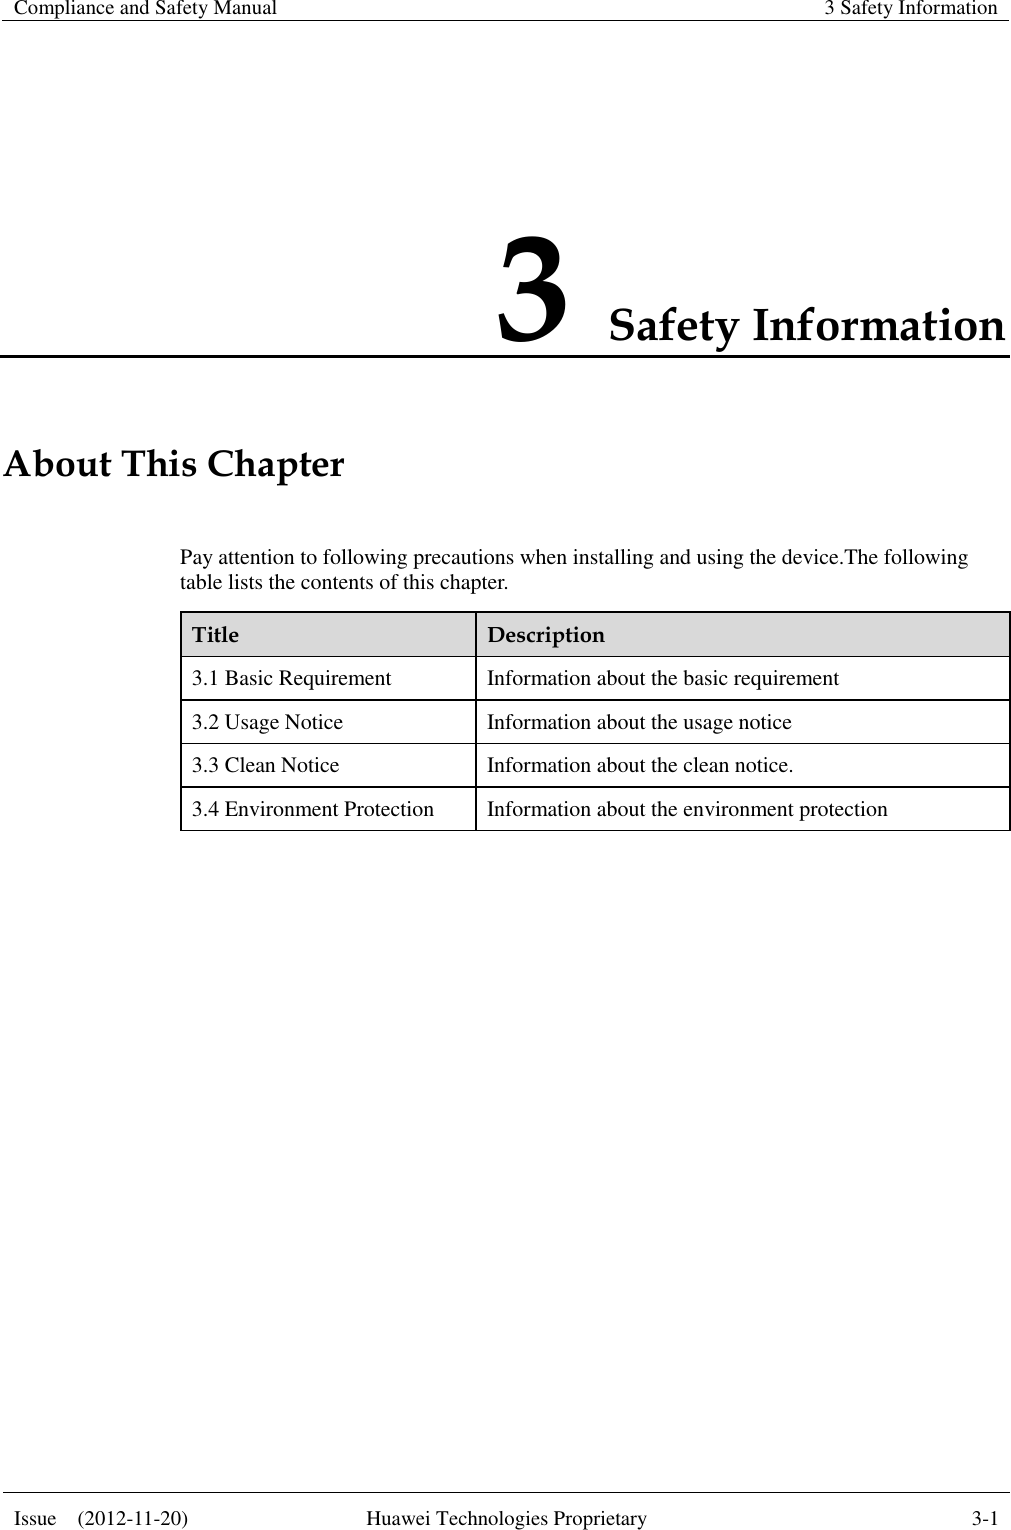 Compliance and Safety Manual  3 Safety Information  Issue    (2012-11-20)  Huawei Technologies Proprietary  3-1  3 Safety Information About This Chapter Pay attention to following precautions when installing and using the device.The following table lists the contents of this chapter. Title  Description 3.1 Basic Requirement  Information about the basic requirement 3.2 Usage Notice  Information about the usage notice 3.3 Clean Notice  Information about the clean notice. 3.4 Environment Protection  Information about the environment protection  